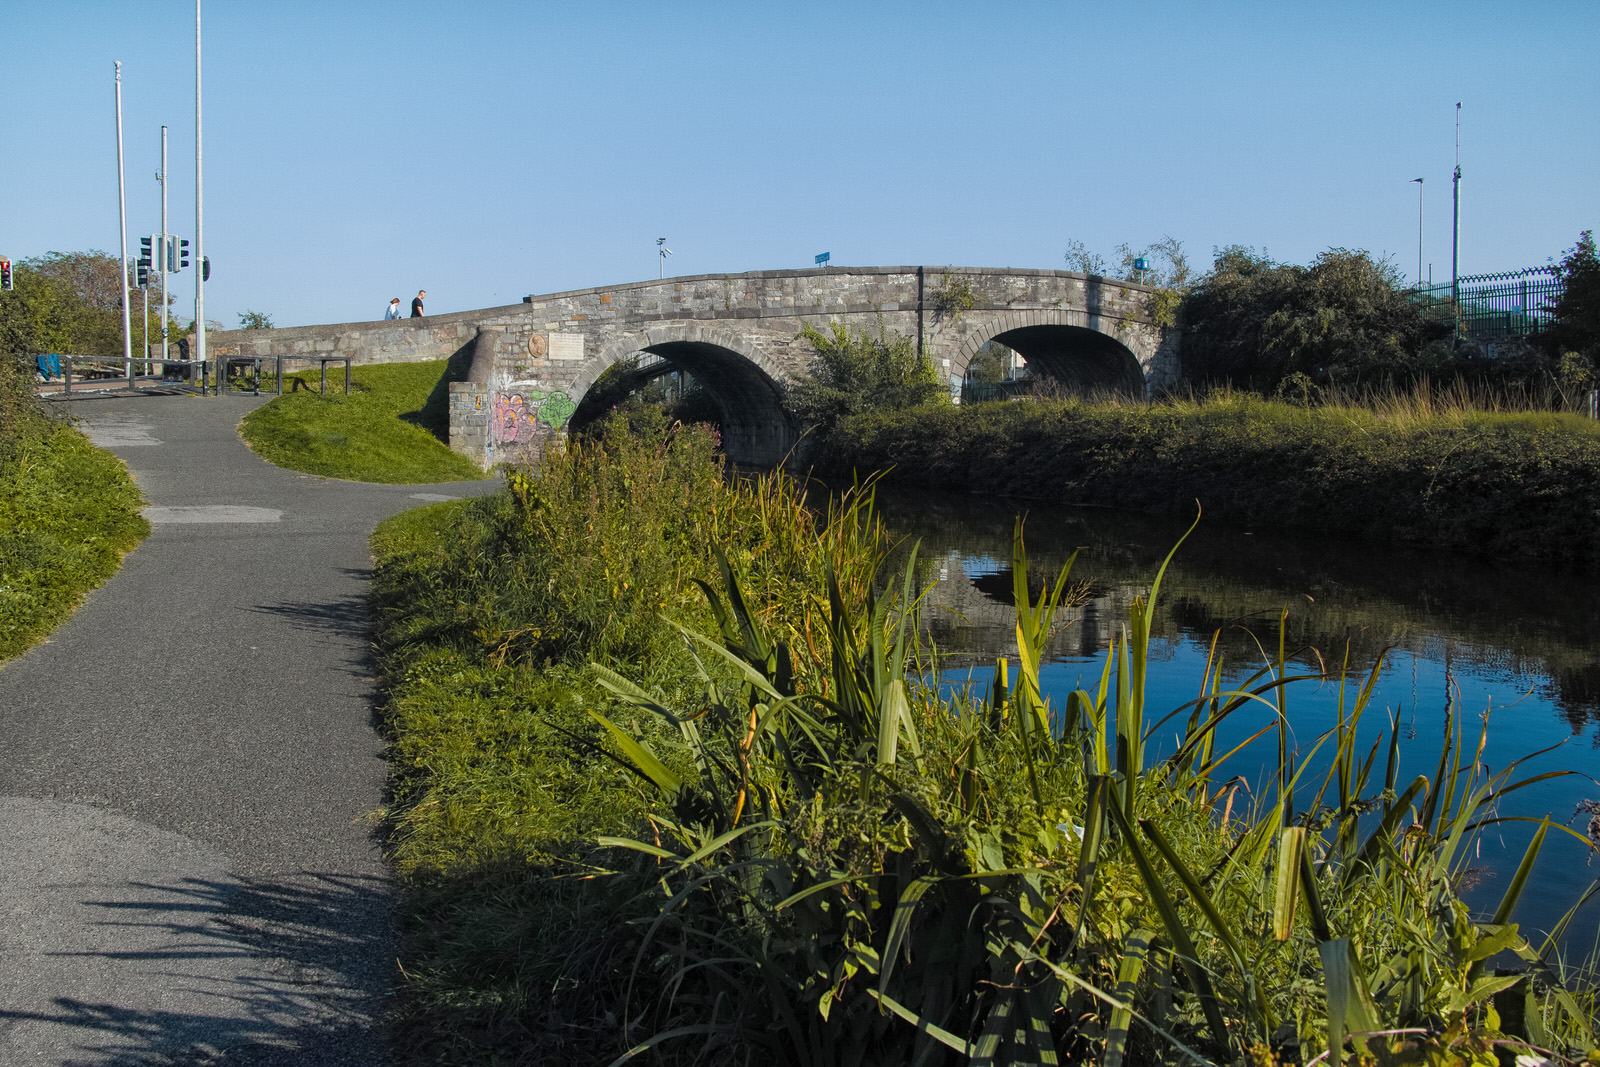  BROOM BRIDGE ON THE ROYAL CANAL  AND NEARBY

 004 